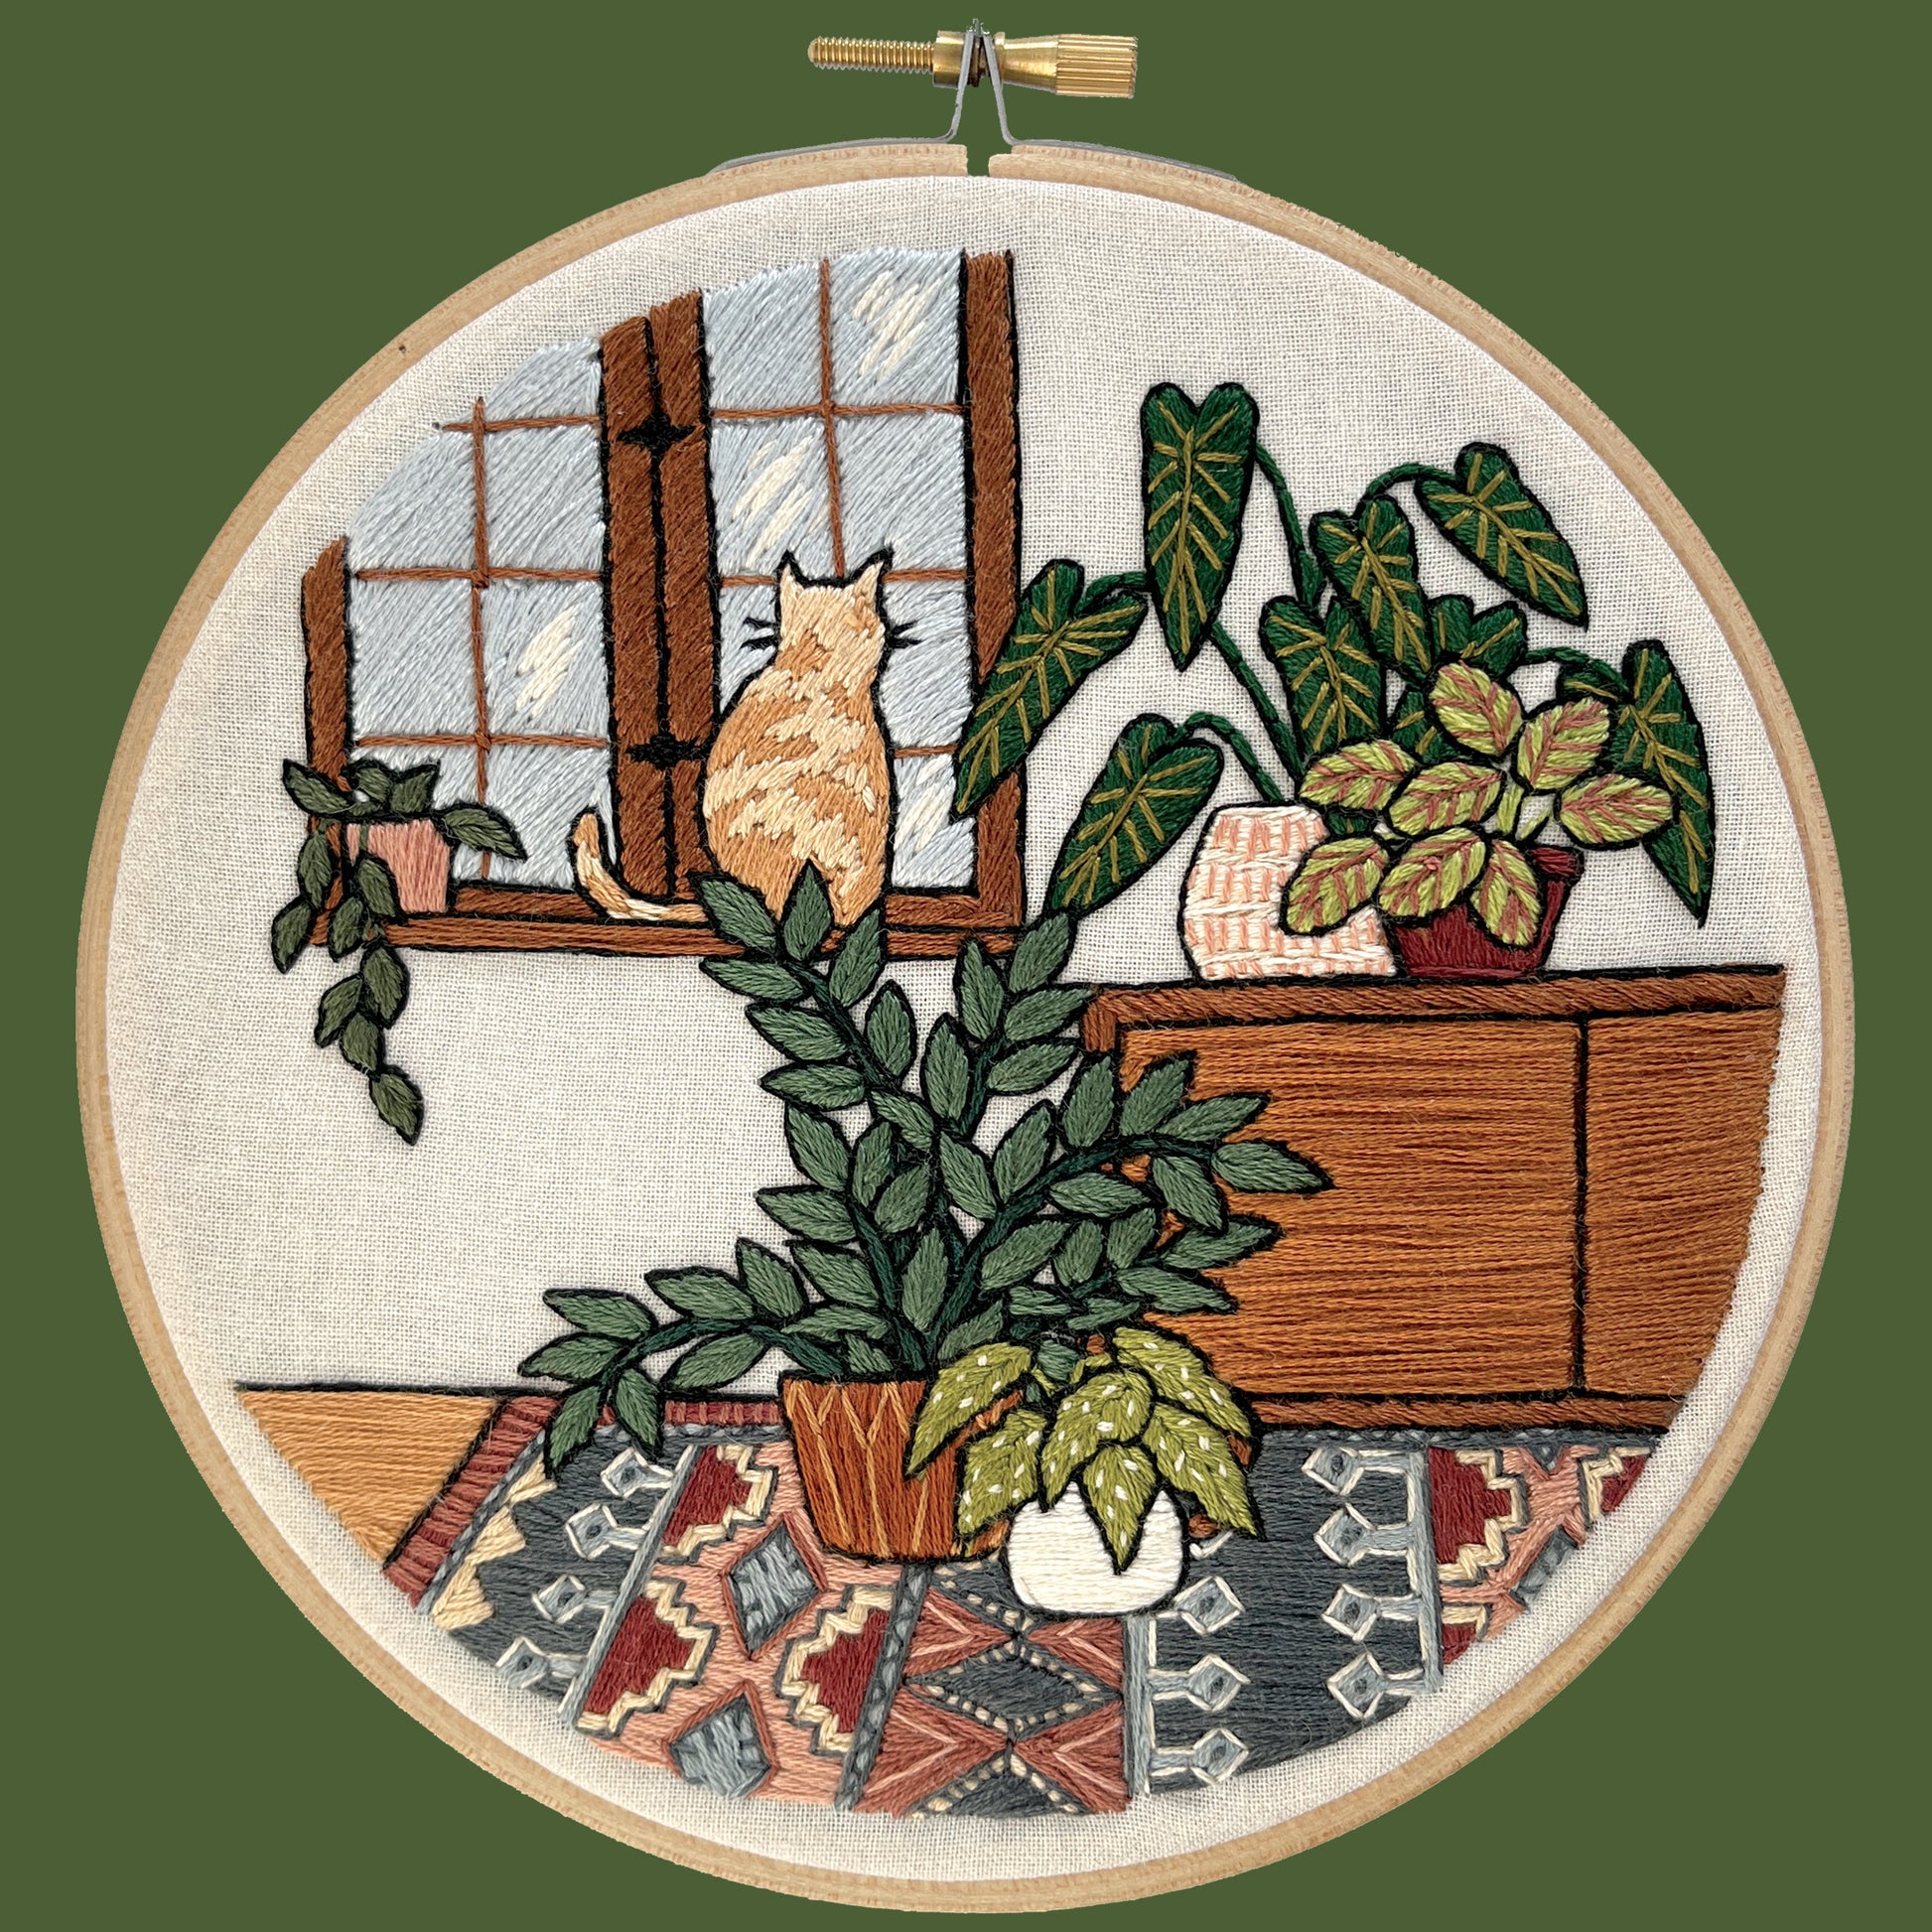 Myfelicity cat Embroidery kit, Adult Set of 3 Patterns, cat-1